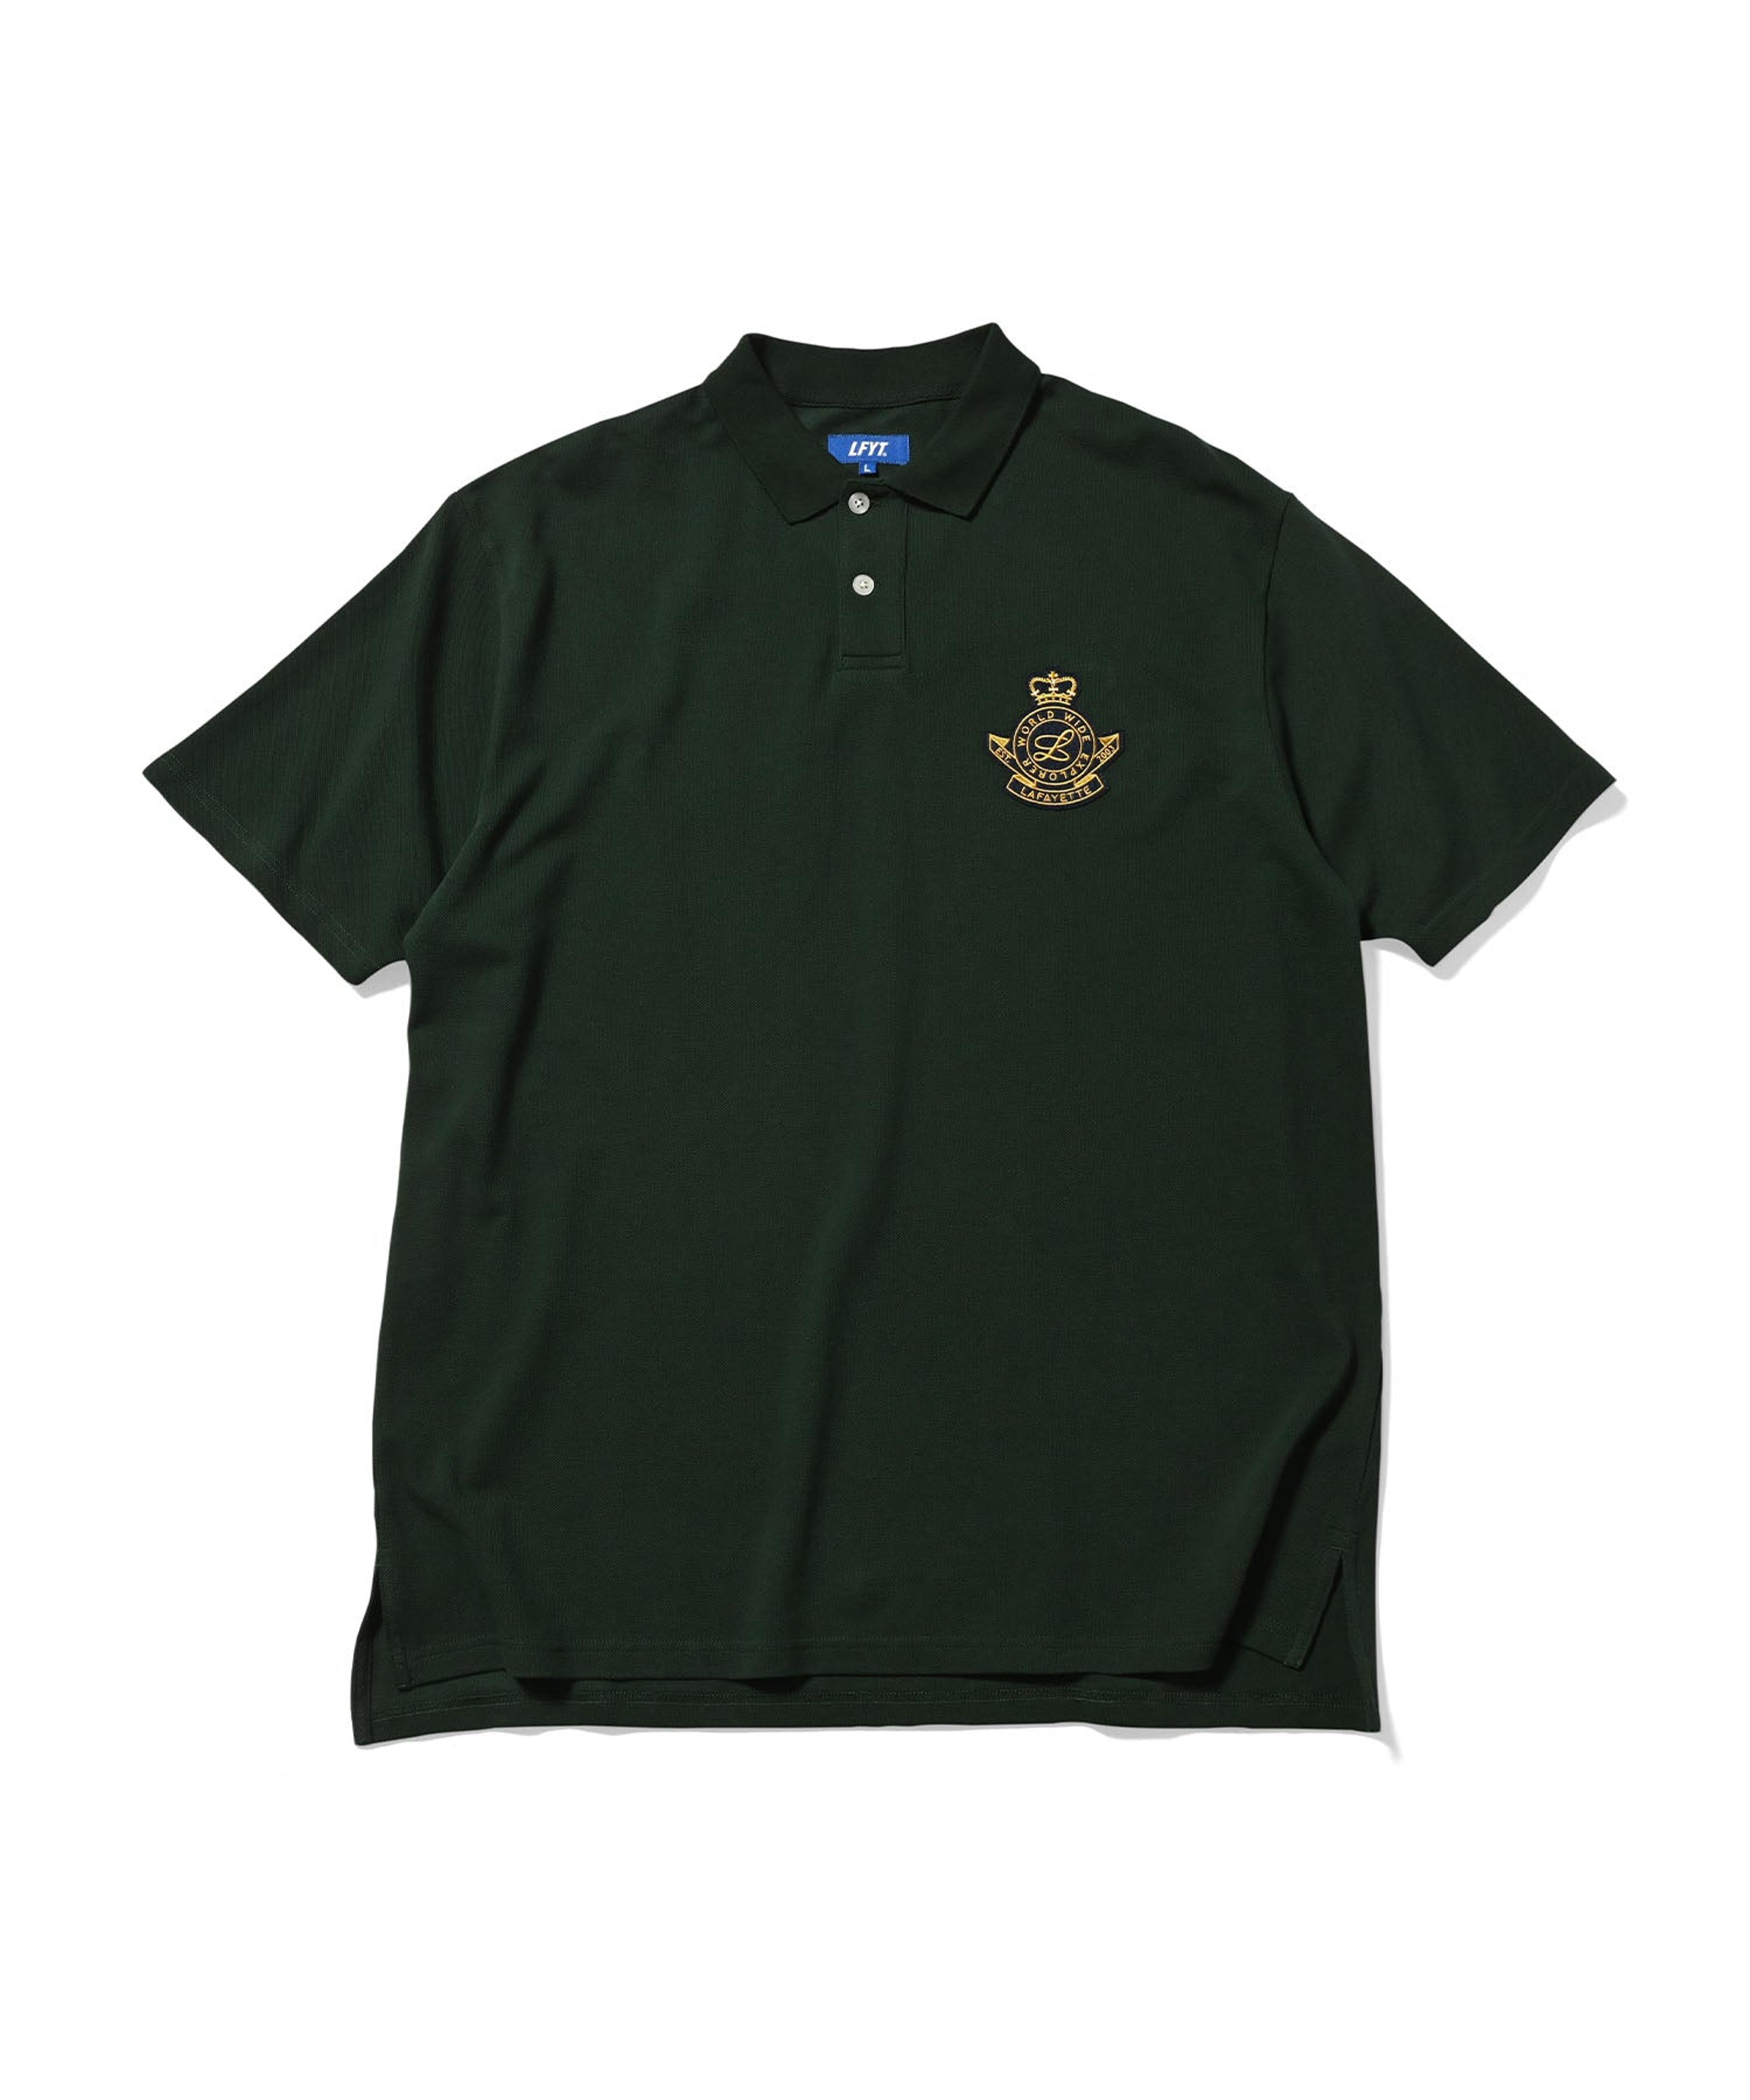 Alternate View 11 of LFYT - COLLEGE COLOR BIG POLO LS240301